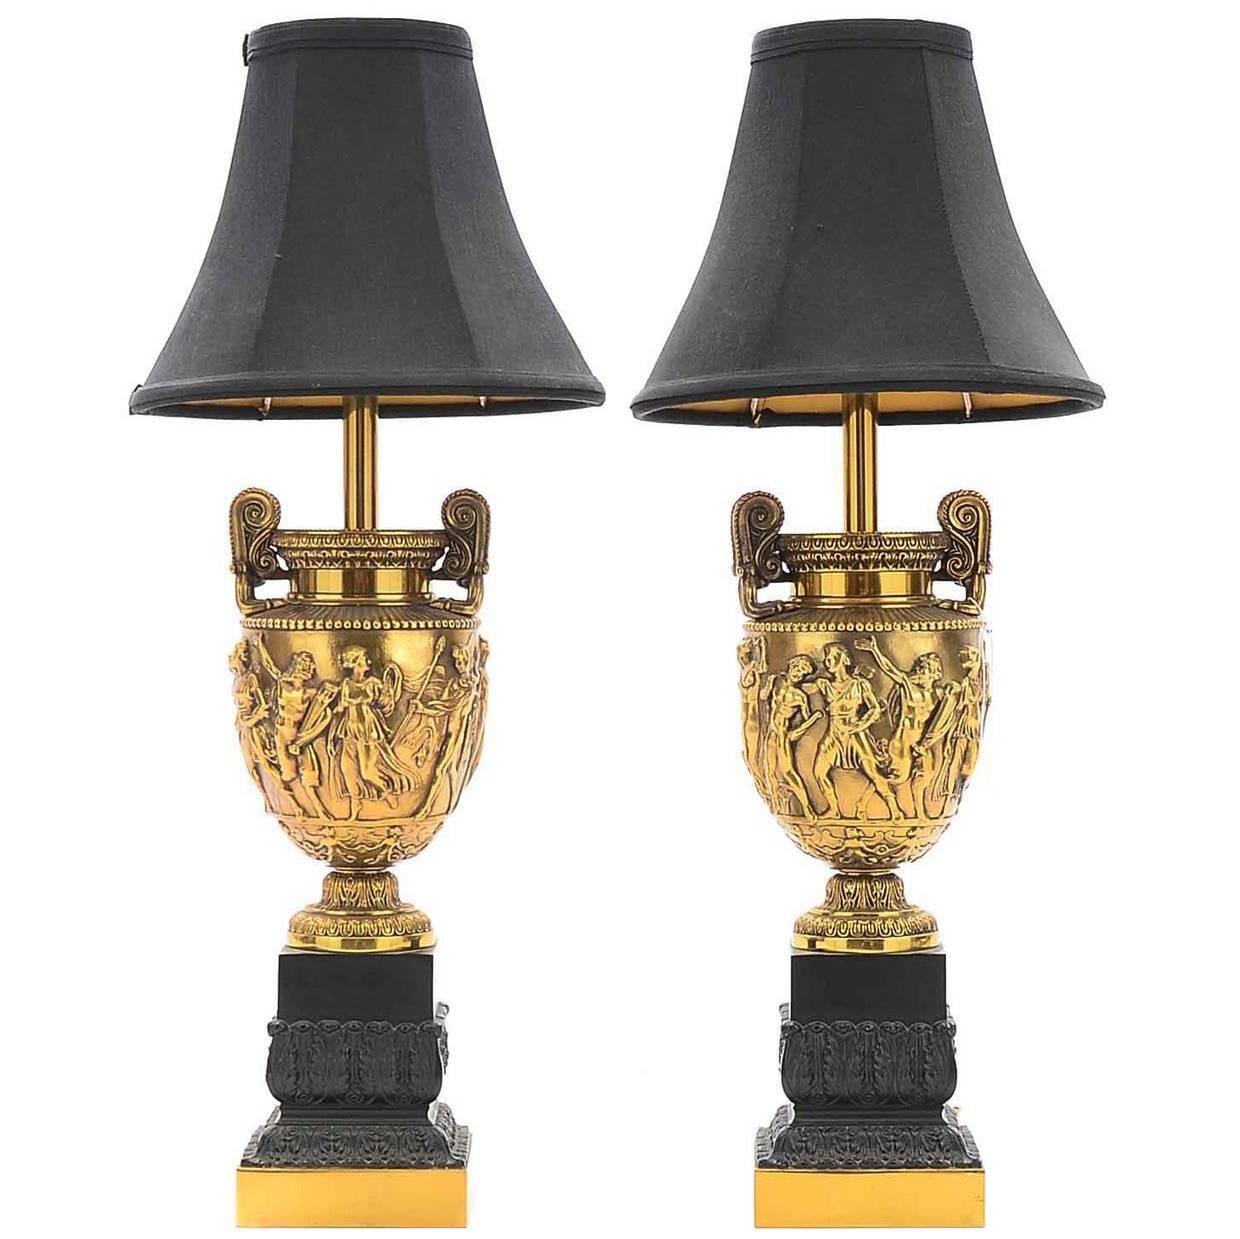 Pair of Torchiere Stiffel Lamps For Sale